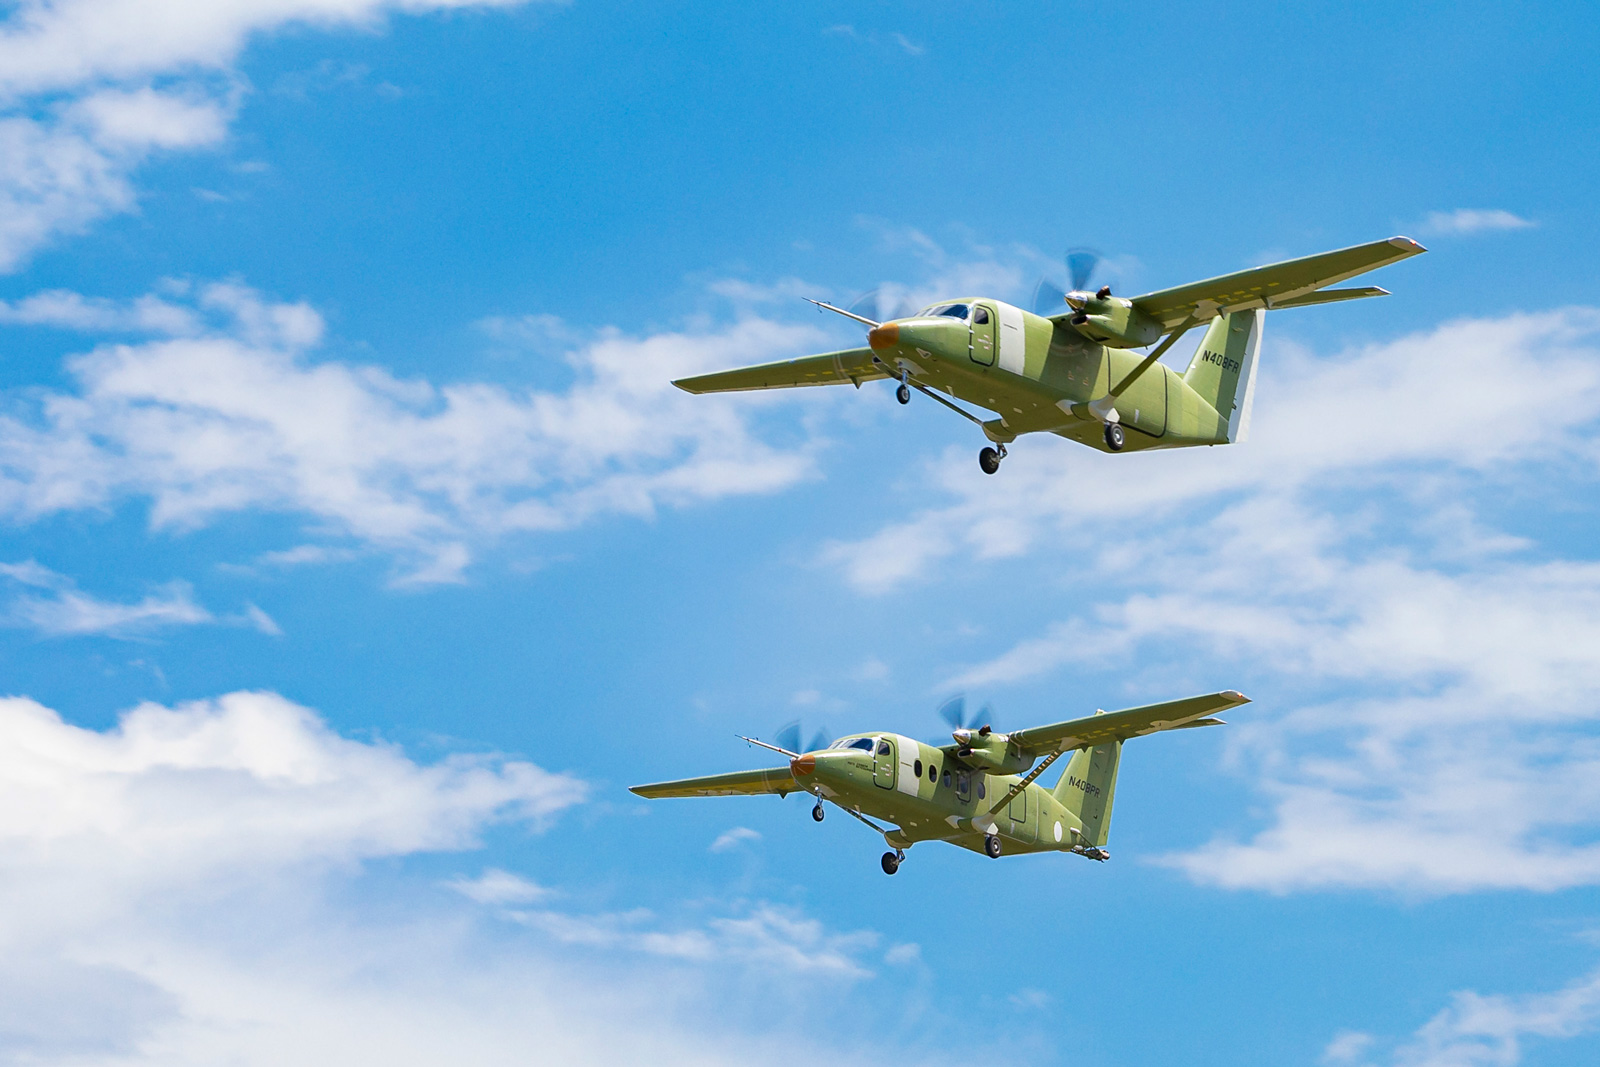 Momentum builds for Cessna SkyCourier as second test article takes flight